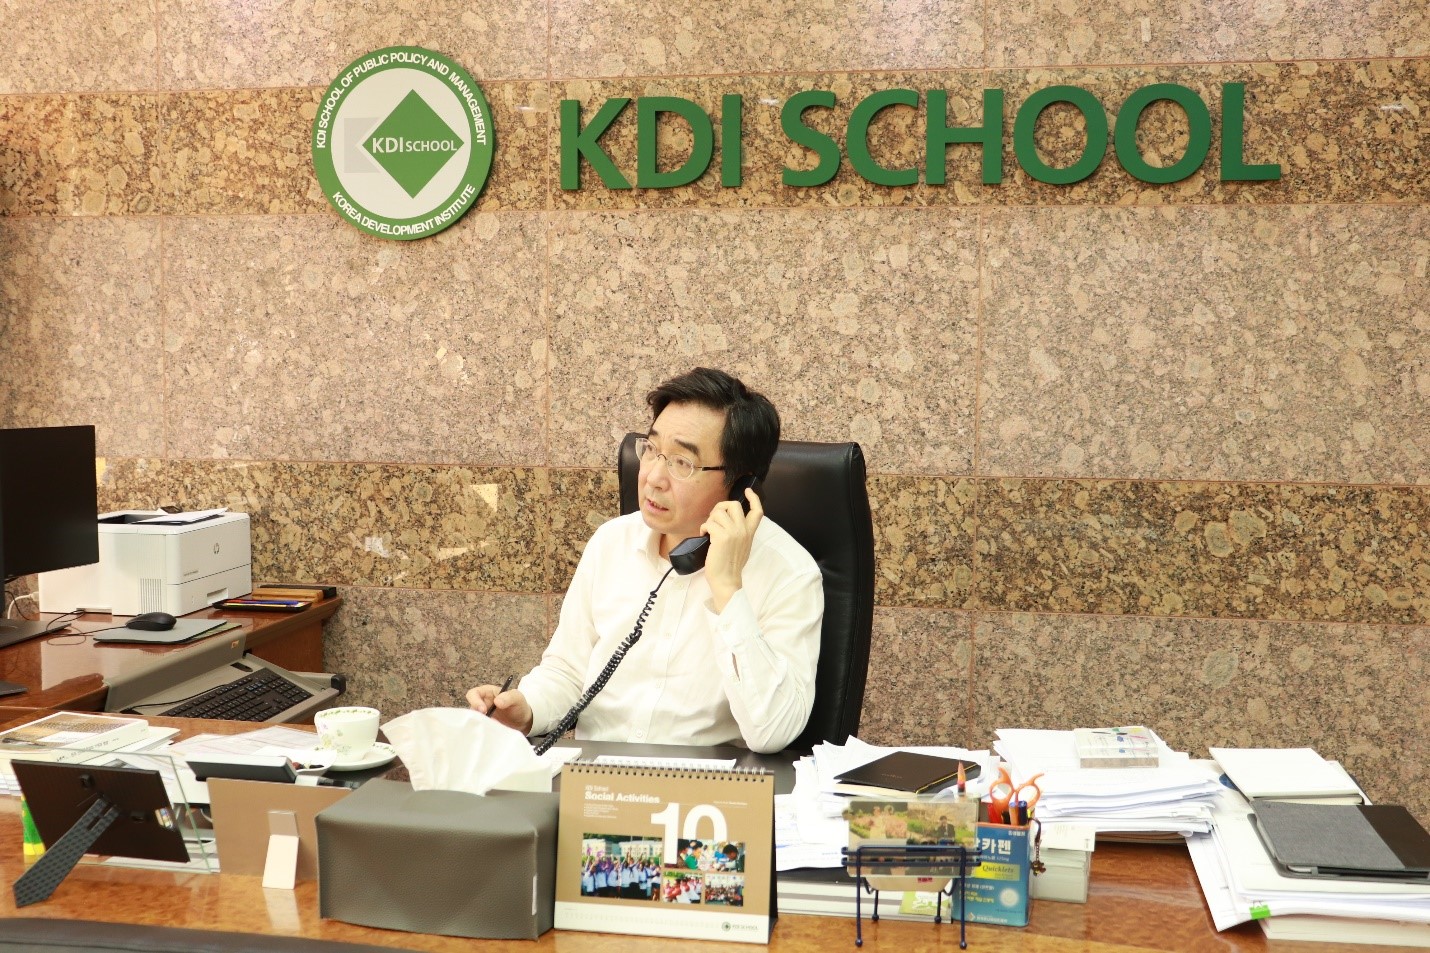 KDIS to be a knowledge hub for key issues, says Dean YOU